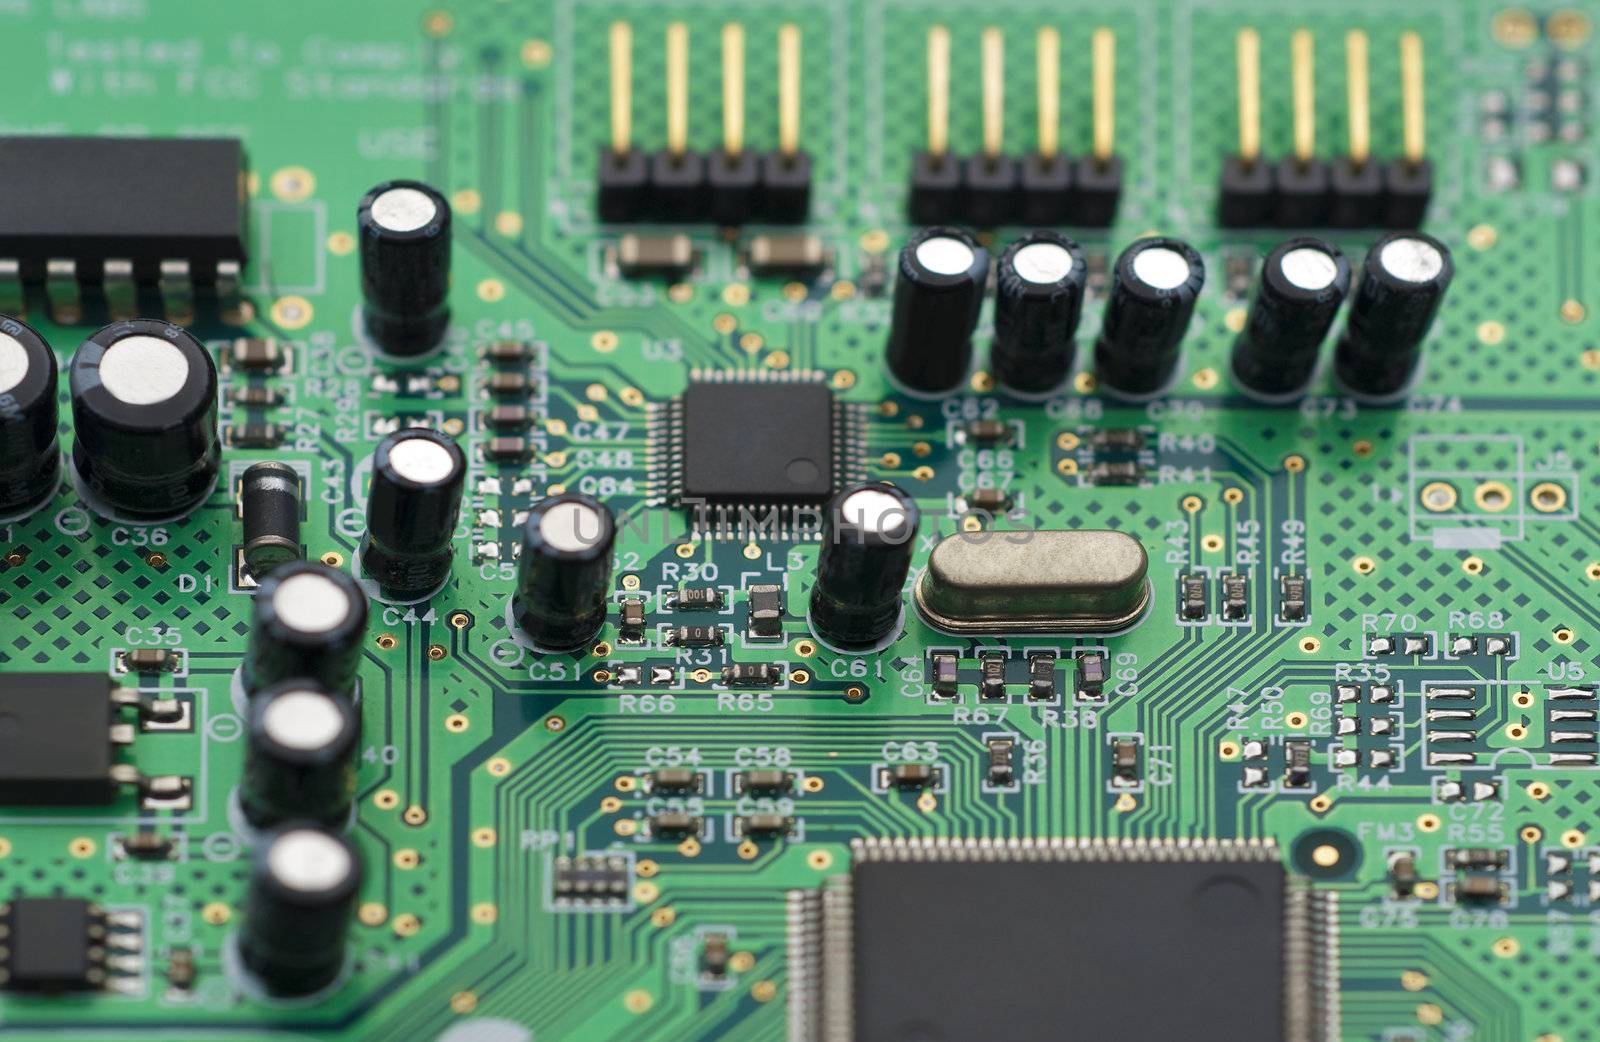 Fragment of the electronic circuit - computer board with chips and components